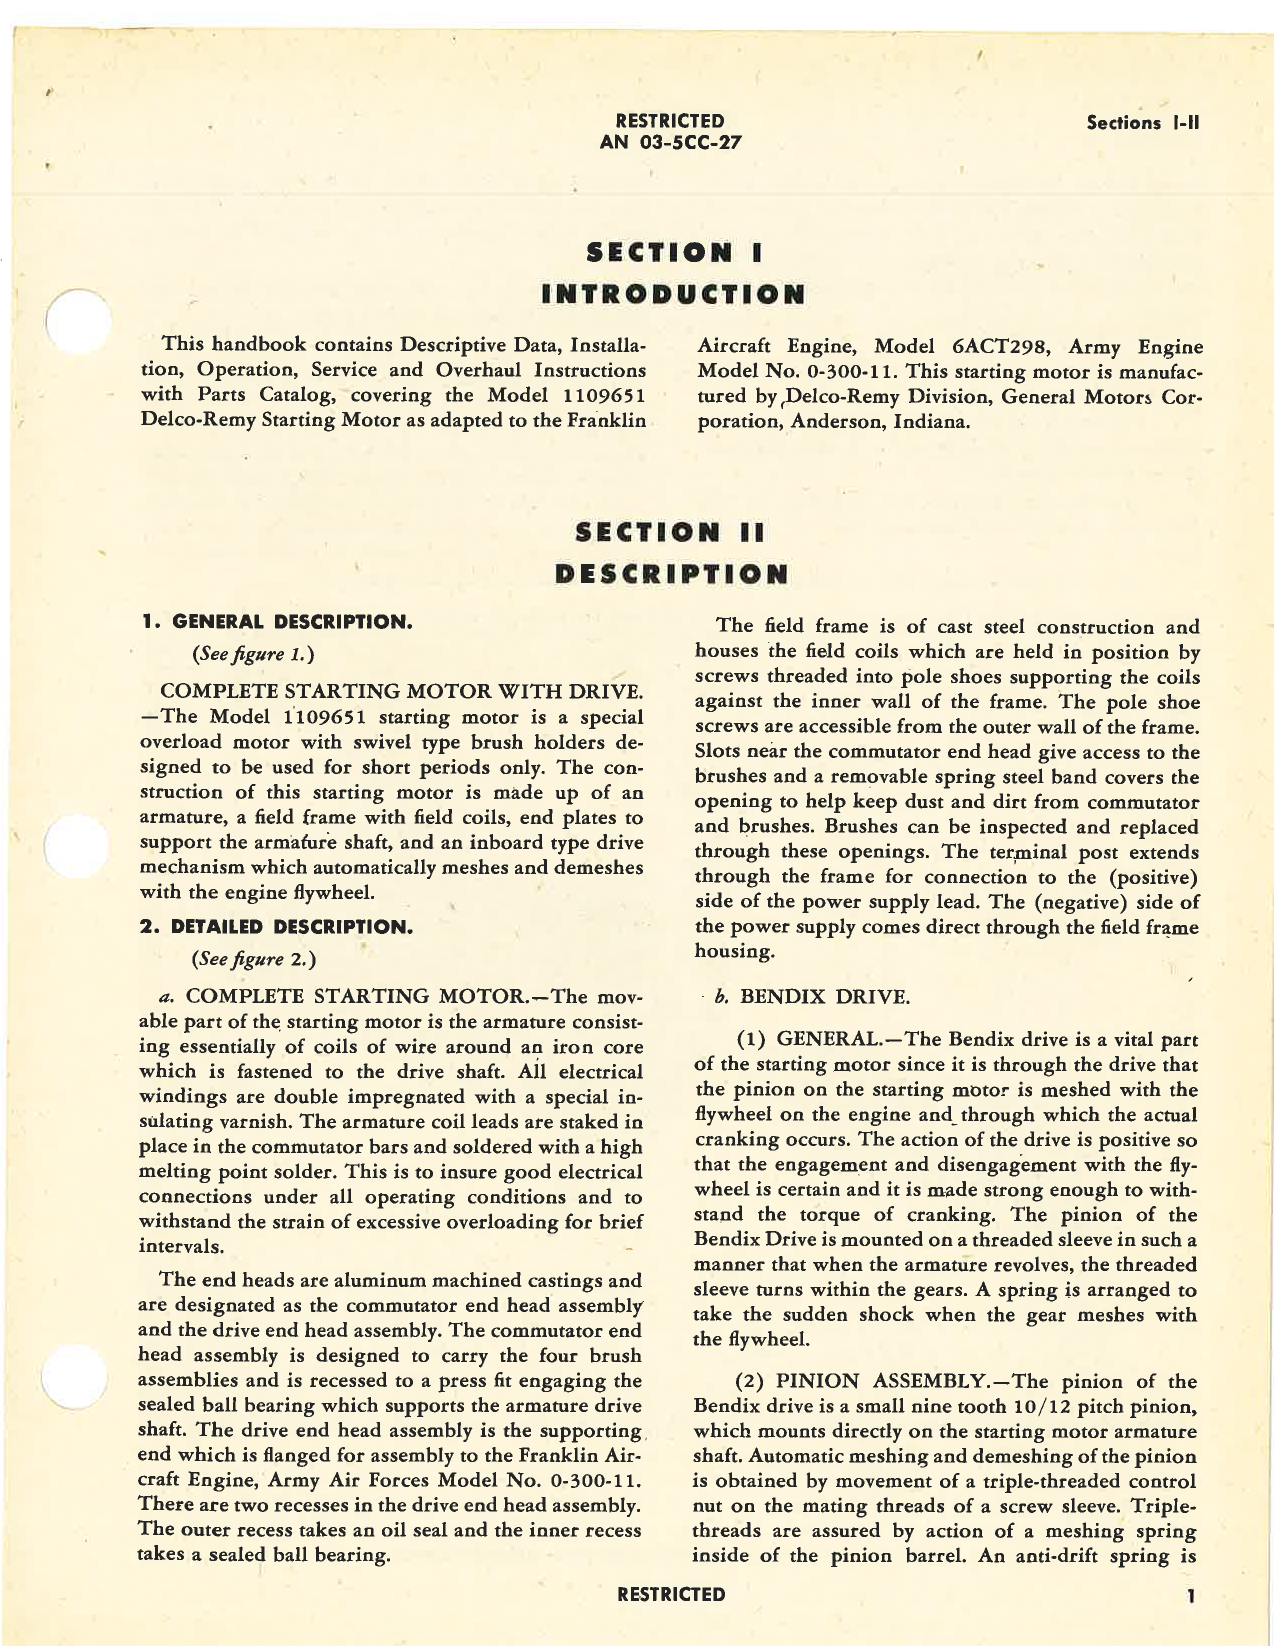 Sample page 5 from AirCorps Library document: Handbook of Instructions with Parts Catalog for Model 1109651 Starting Motor